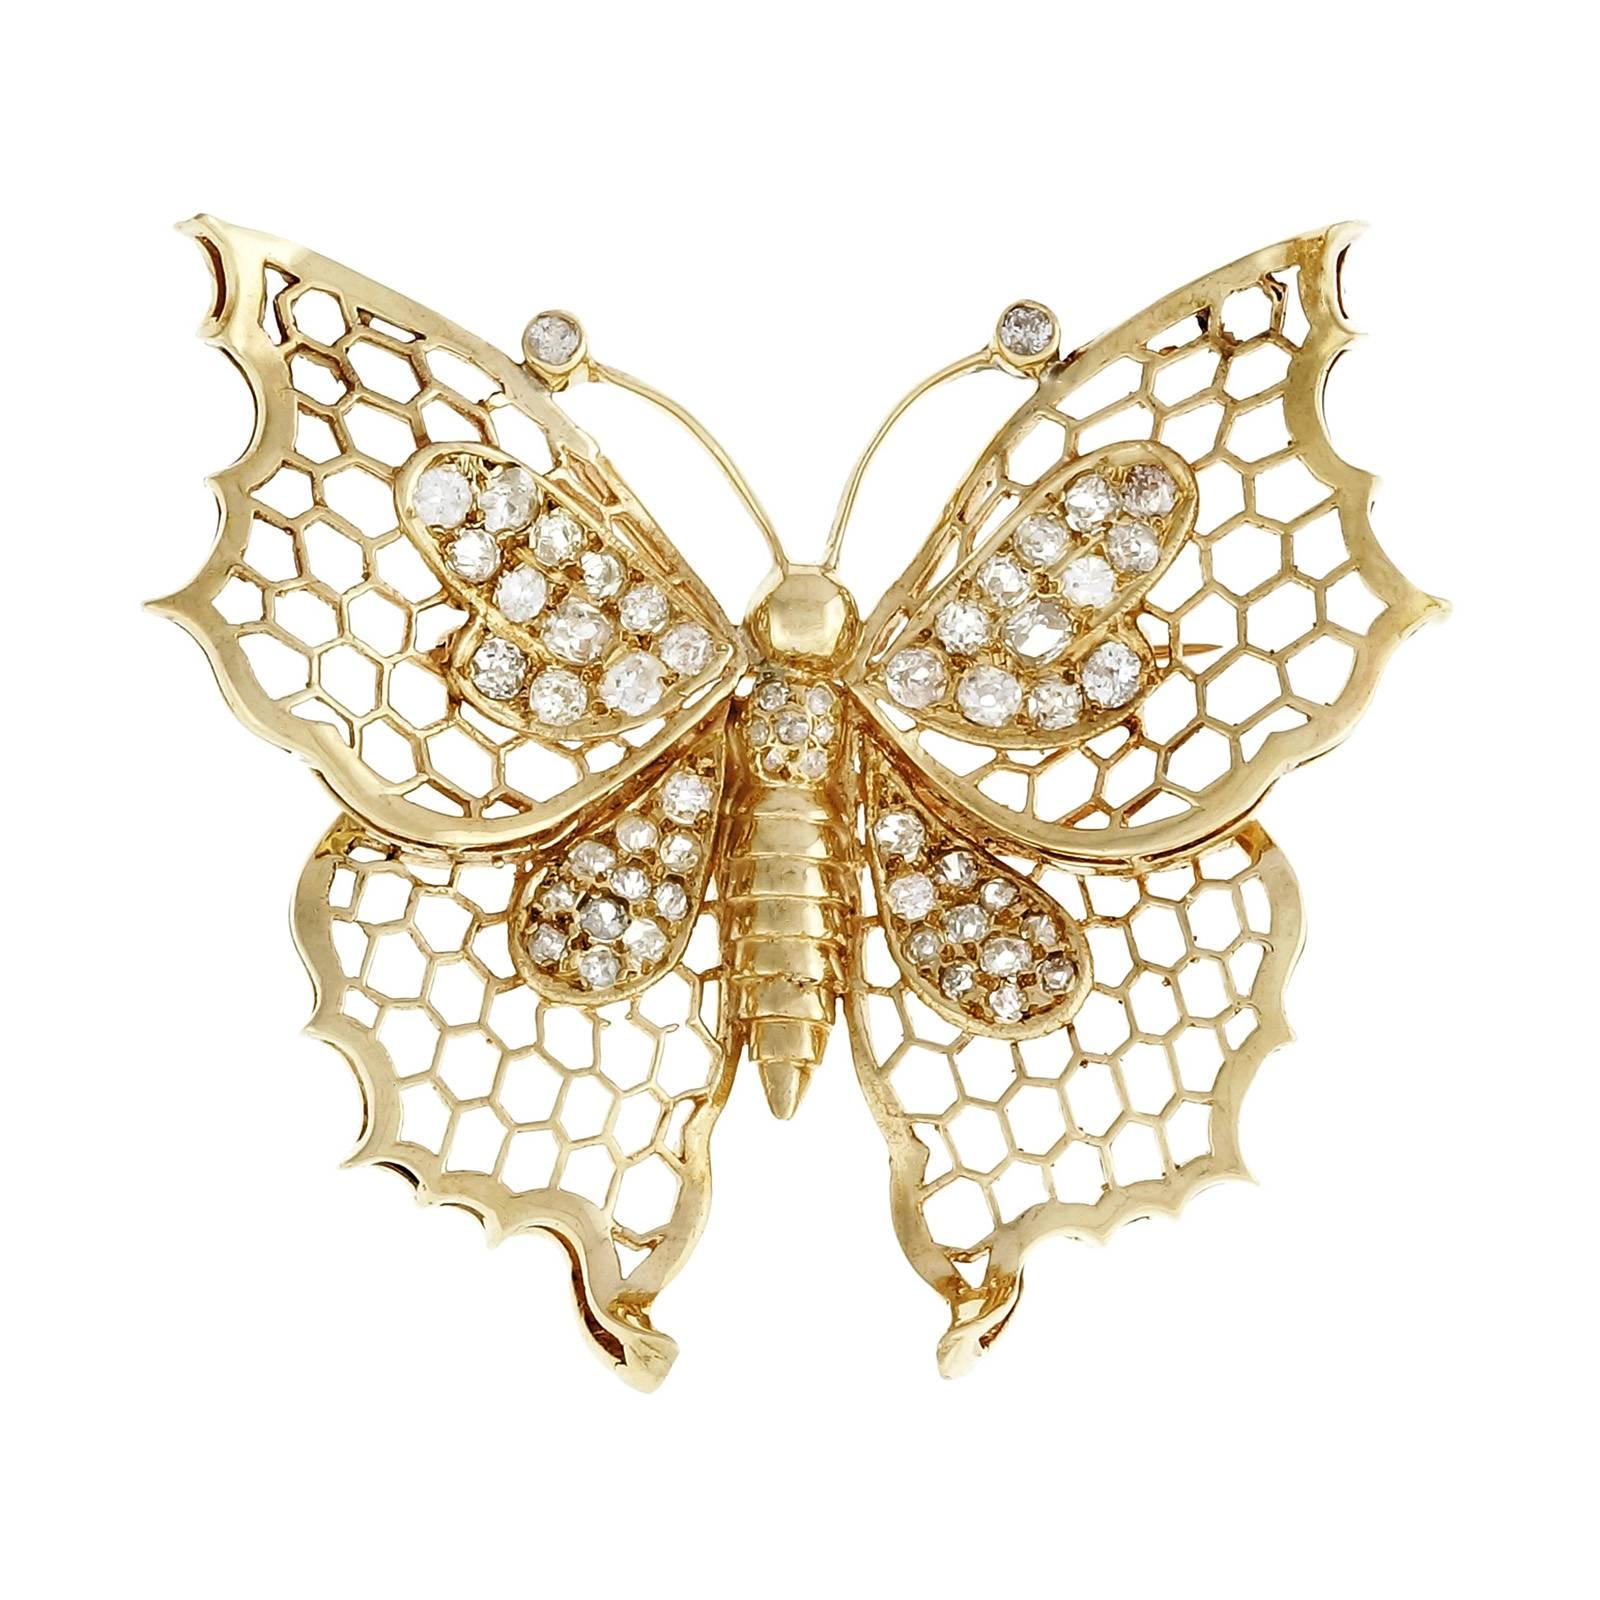 Open work 1930's Butterfly diamond brooch. 55 old mine cut diamonds in a a 14k yellow gold butterfly. 

55 old mine cut diamonds, approx. total weight 1.50cts, J – K, SI
14k yellow gold
Tested: 14k
15.5 grams
Top to bottom: 48.94mm or 1.93